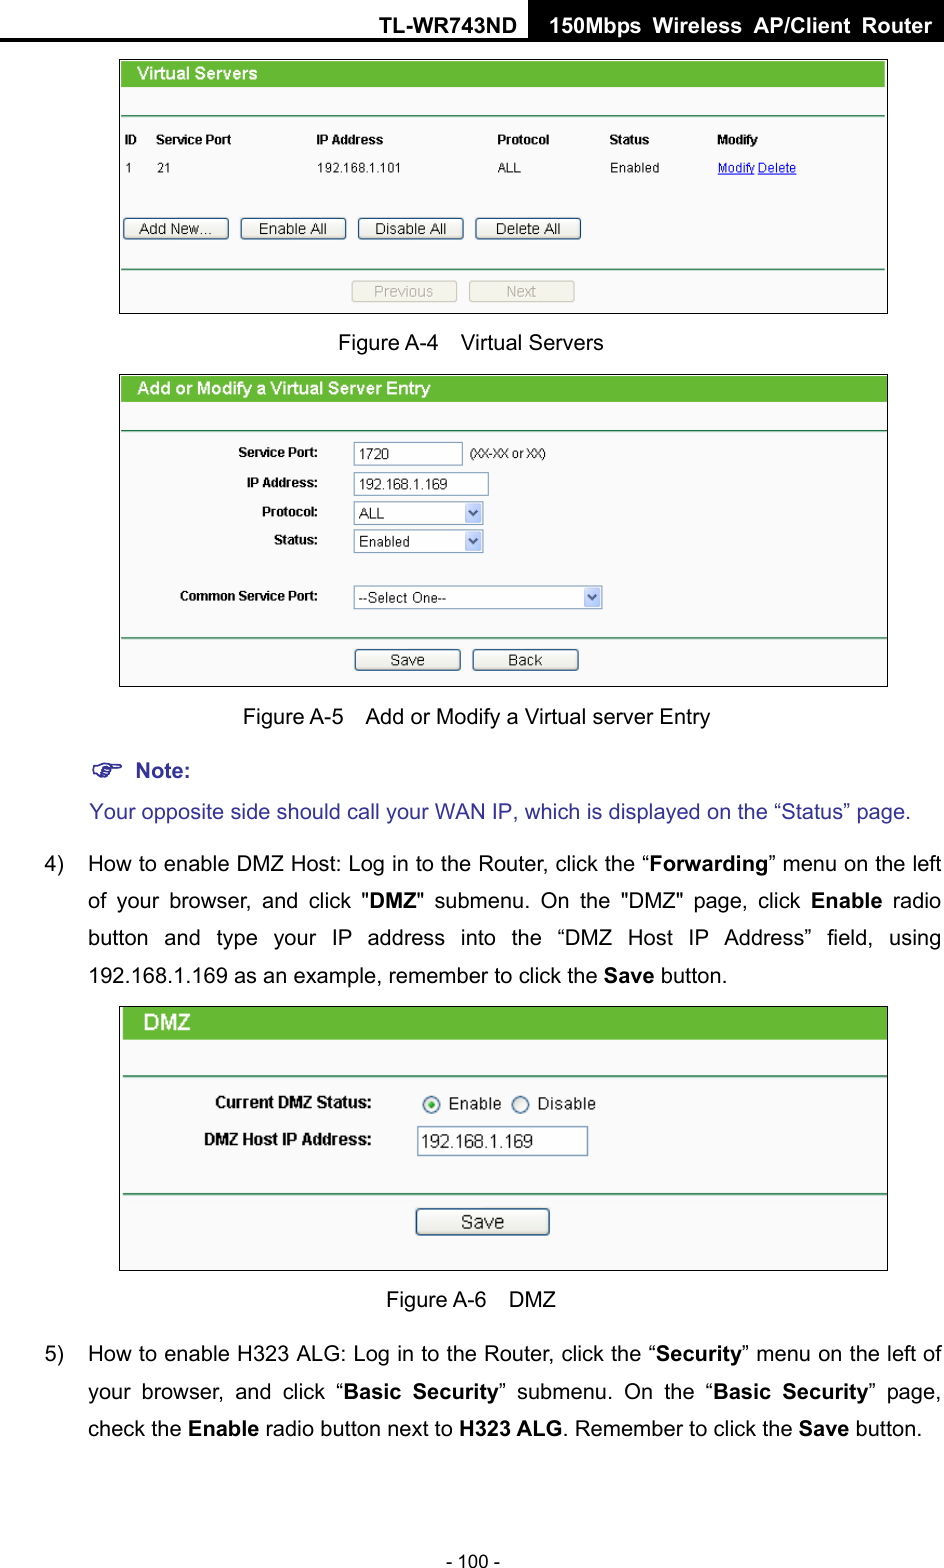 TL-WR743ND 150Mbps Wireless AP/Client Router - 100 -  Figure A-4  Virtual Servers    Figure A-5    Add or Modify a Virtual server Entry ) Note: Your opposite side should call your WAN IP, which is displayed on the “Status” page. 4)  How to enable DMZ Host: Log in to the Router, click the “Forwarding” menu on the left of your browser, and click &quot;DMZ&quot; submenu. On the &quot;DMZ&quot; page, click Enable radio button and type your IP address into the “DMZ Host IP Address” field, using 192.168.1.169 as an example, remember to click the Save button.    Figure A-6  DMZ 5)  How to enable H323 ALG: Log in to the Router, click the “Security” menu on the left of your browser, and click “Basic Security” submenu. On the “Basic Security” page, check the Enable radio button next to H323 ALG. Remember to click the Save button. 